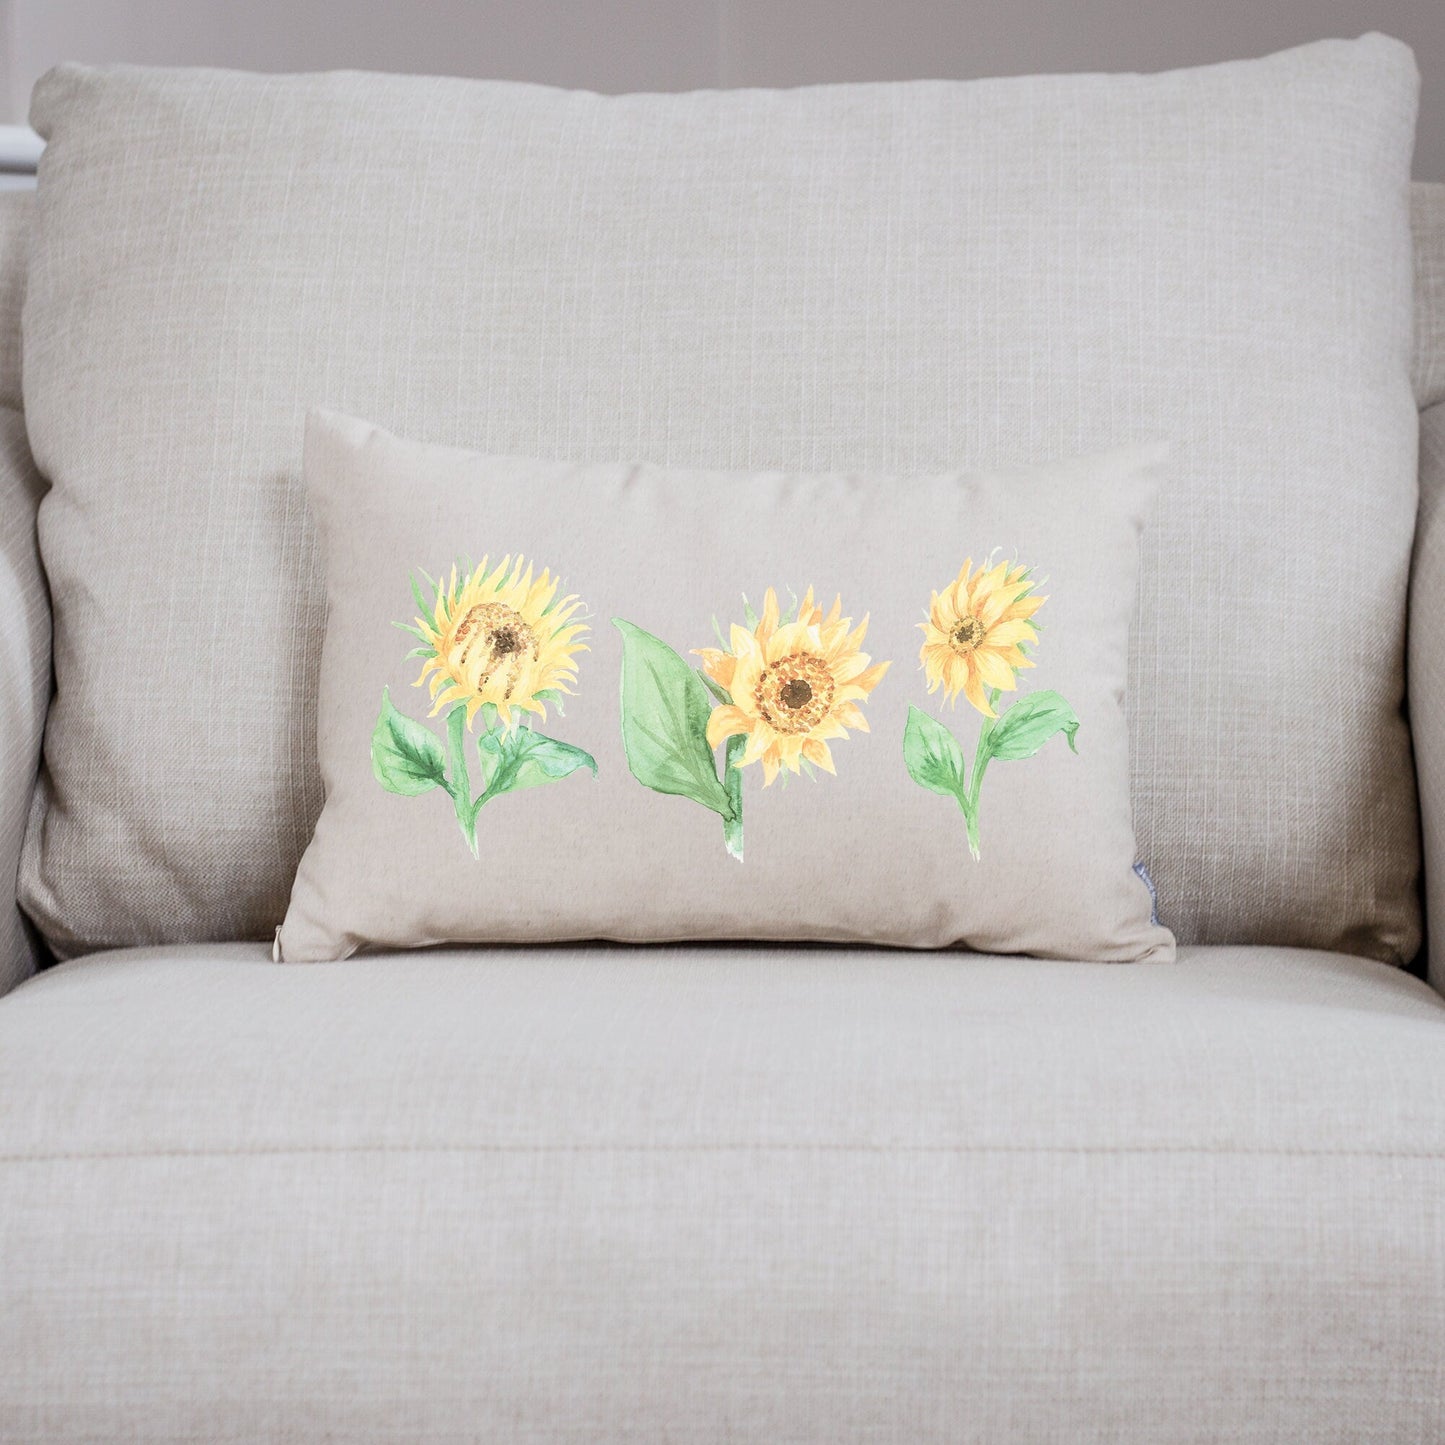 Load image into Gallery viewer, Field of Sunflowers Pillow | Summer Decor | Rustic Fall Decor | Farmhouse Decor | Decorative Pillow | Sunflower Decor | Sunflower Field
